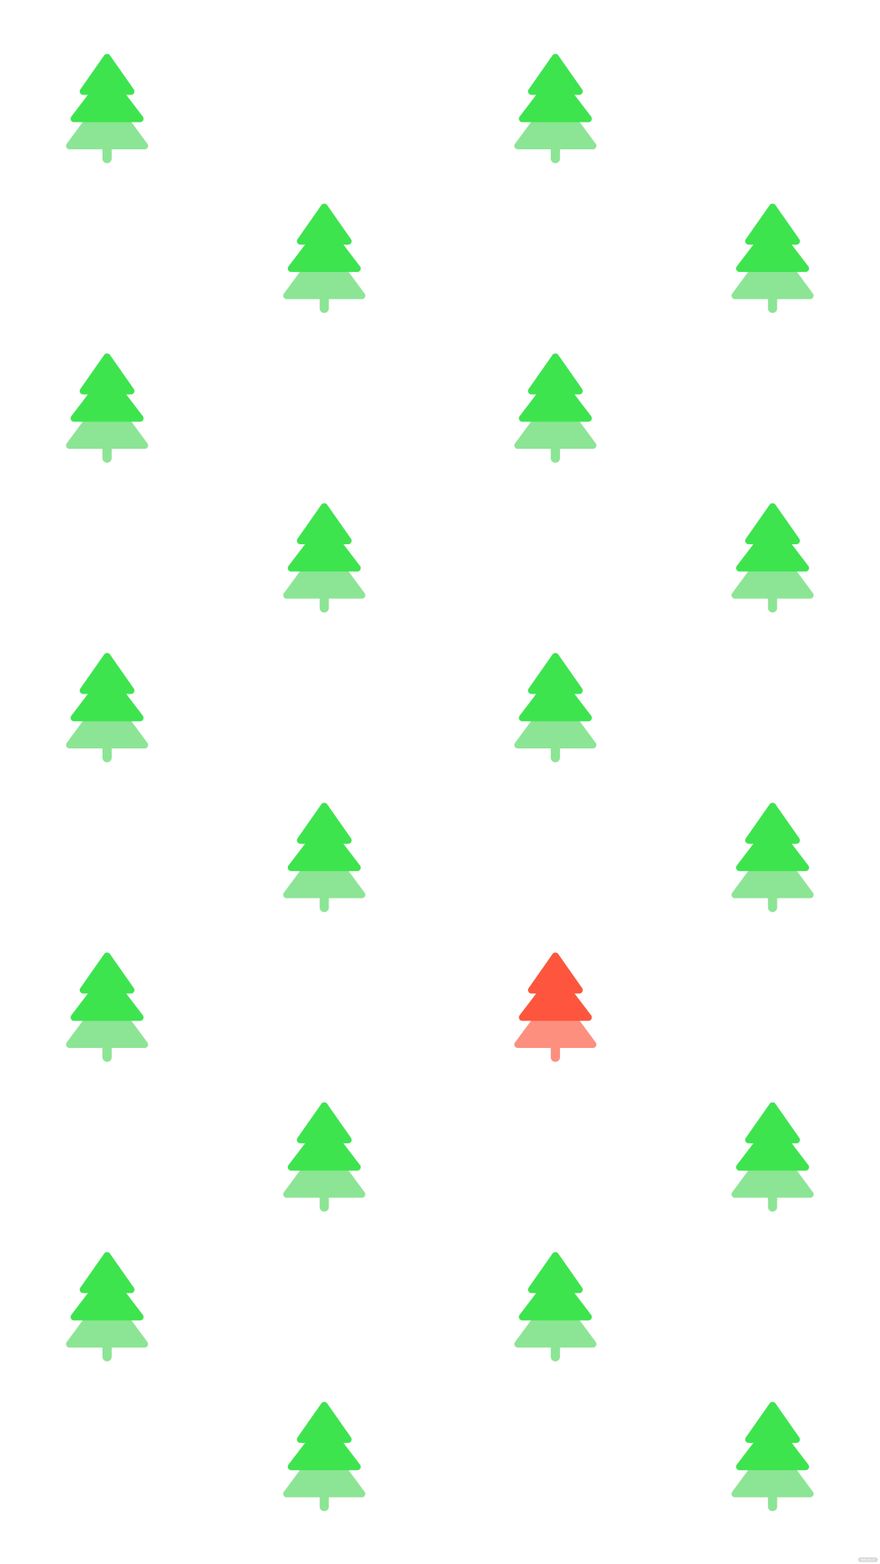 Free Holiday Iphone Background in Illustrator, EPS, SVG, JPG